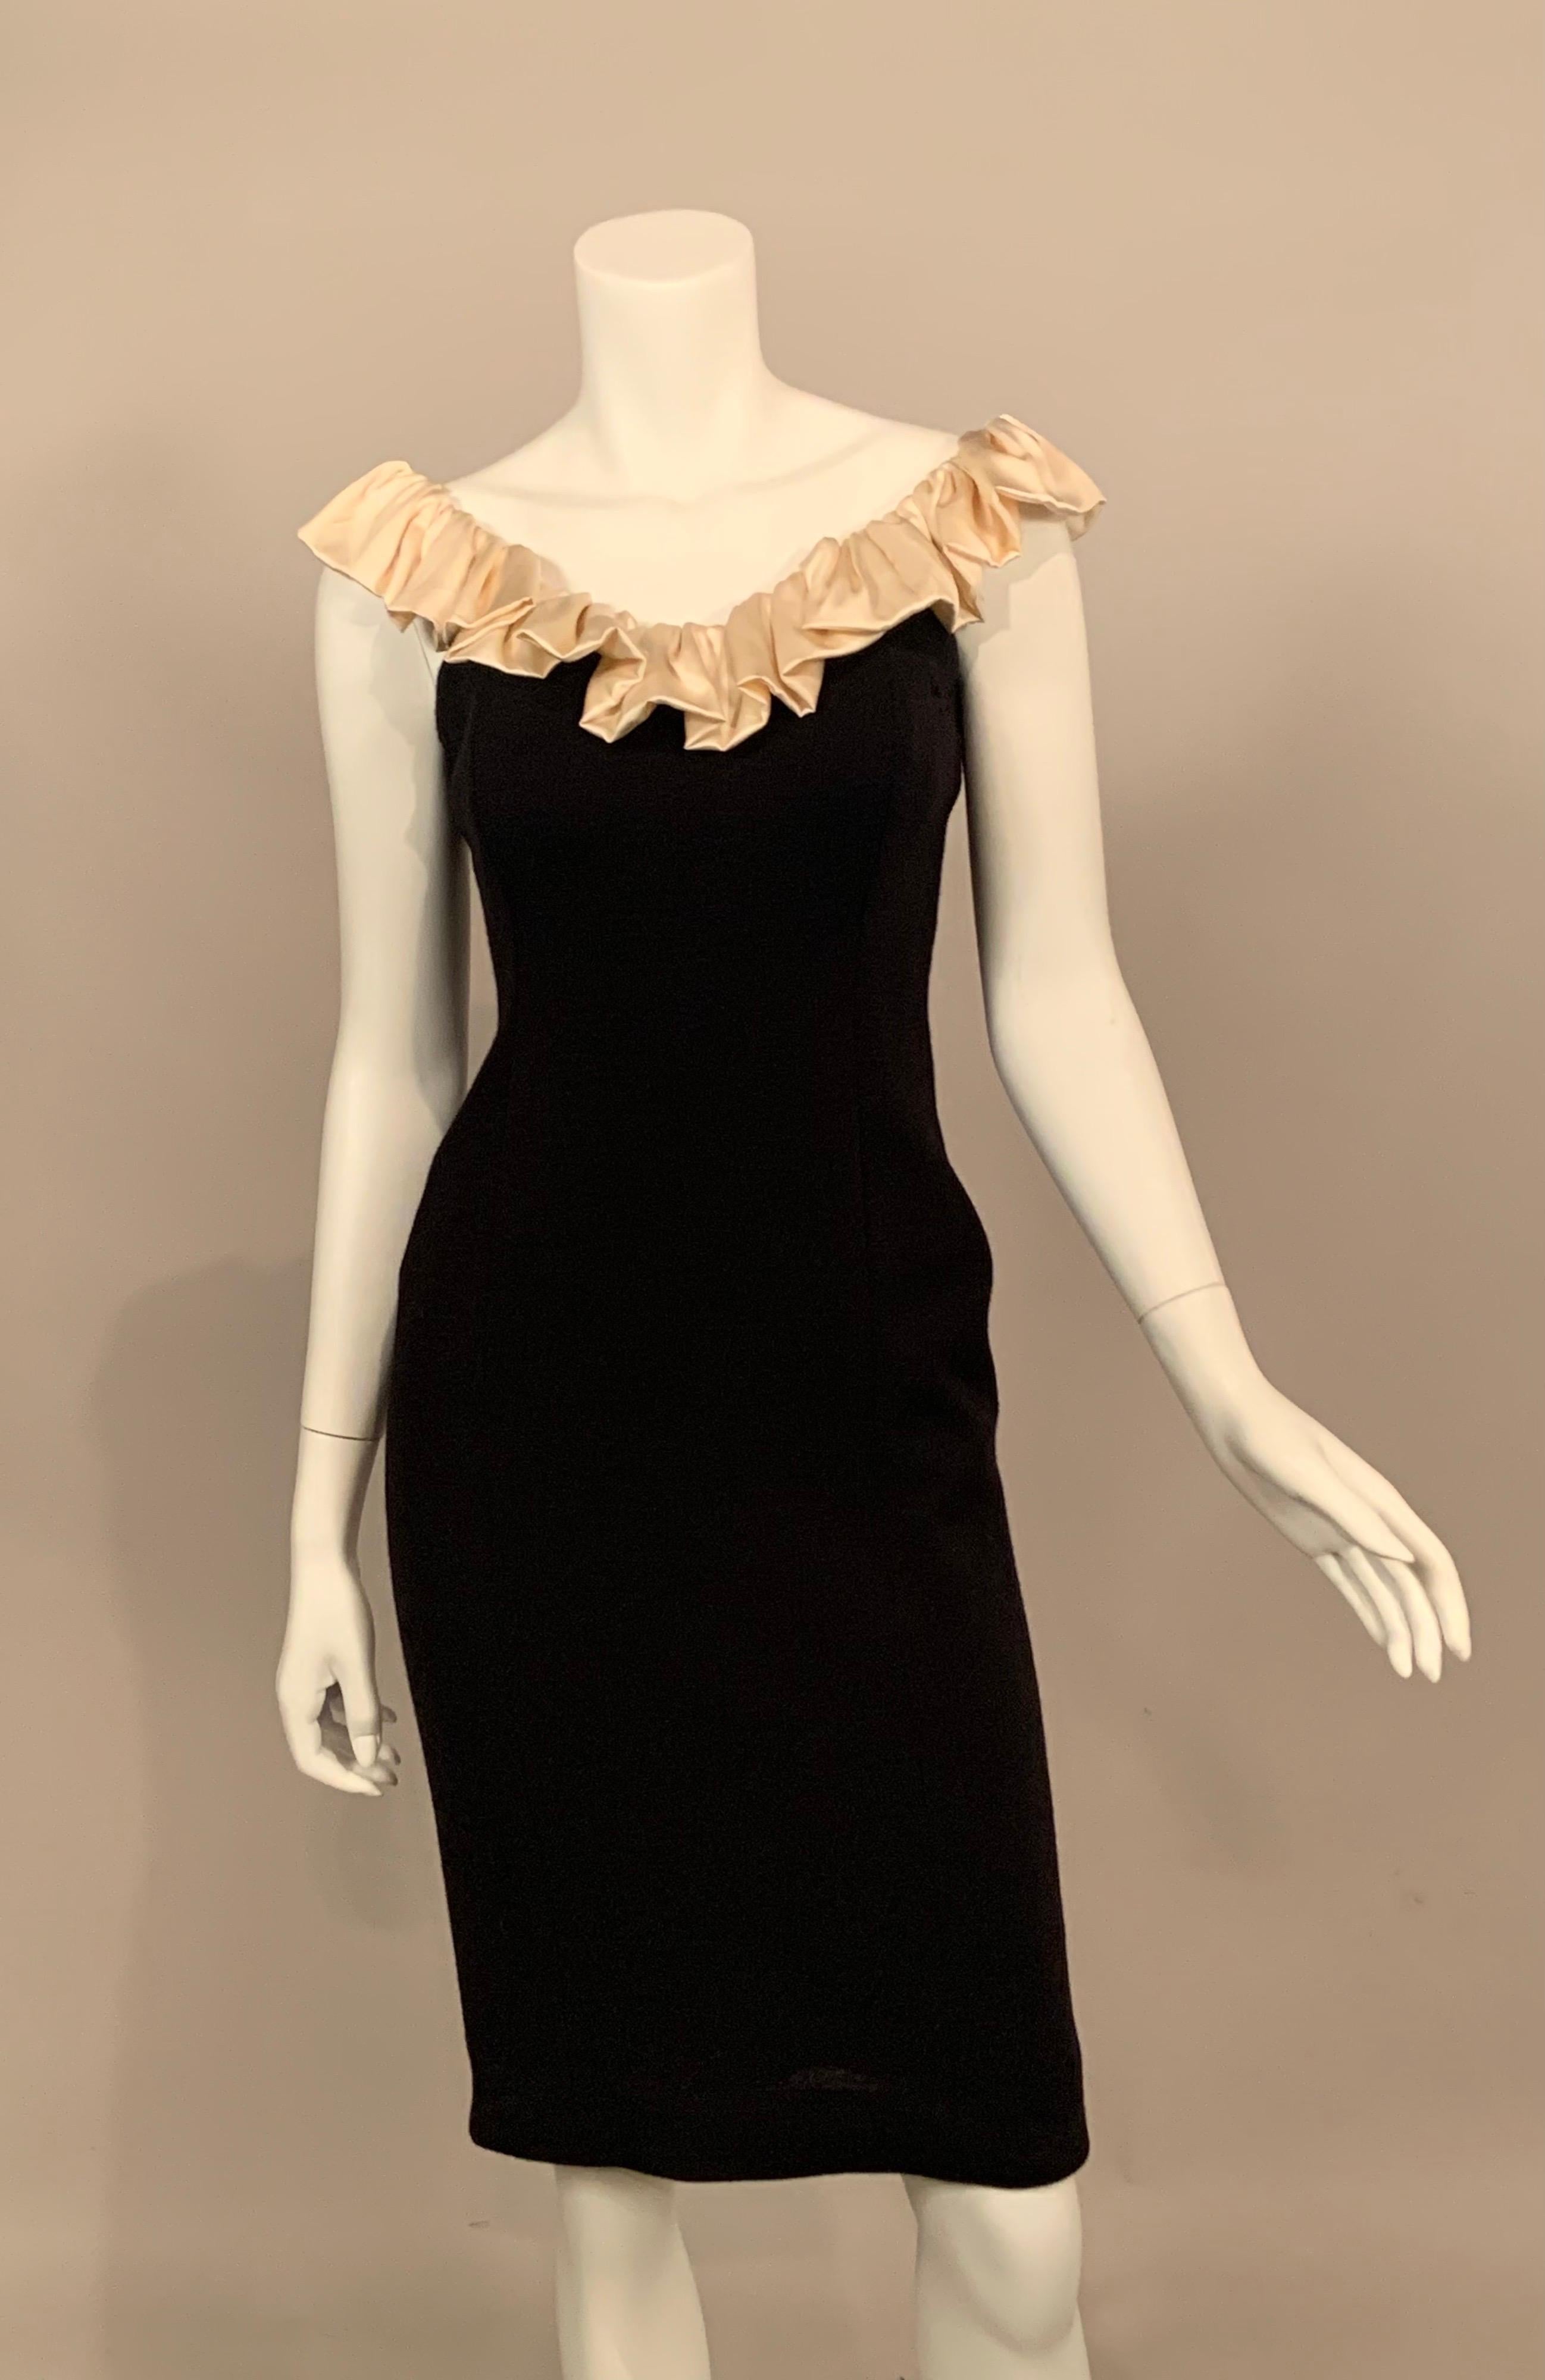 Black Wool Dress with Off the Shoulder Cream Satin Ruffled Neckline In Excellent Condition For Sale In New Hope, PA